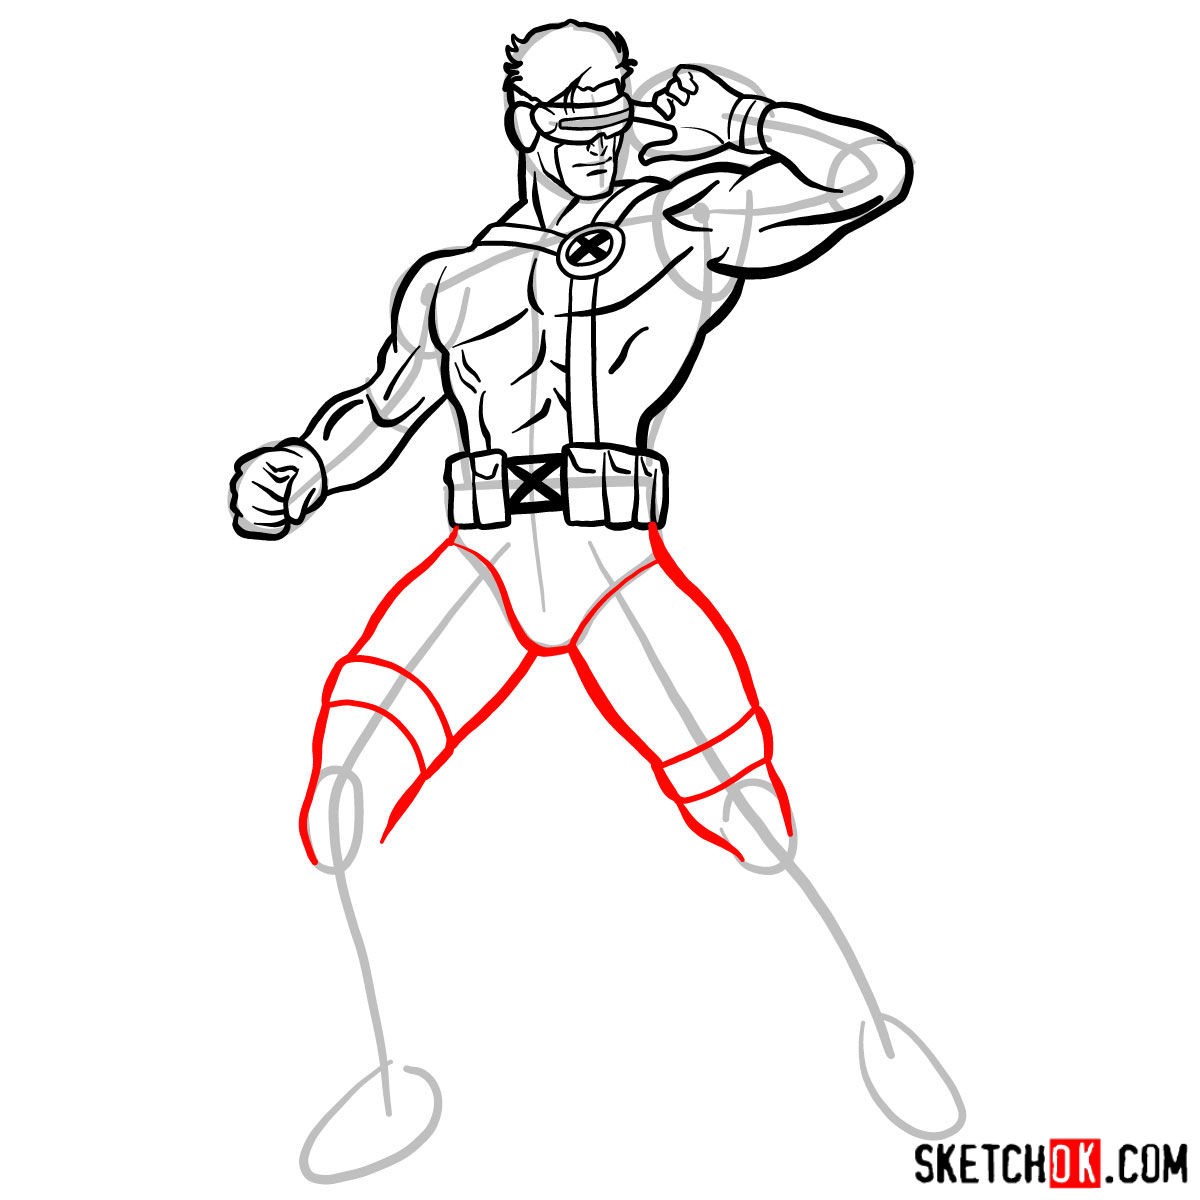 How to draw Cyclops from X-Men - step 13